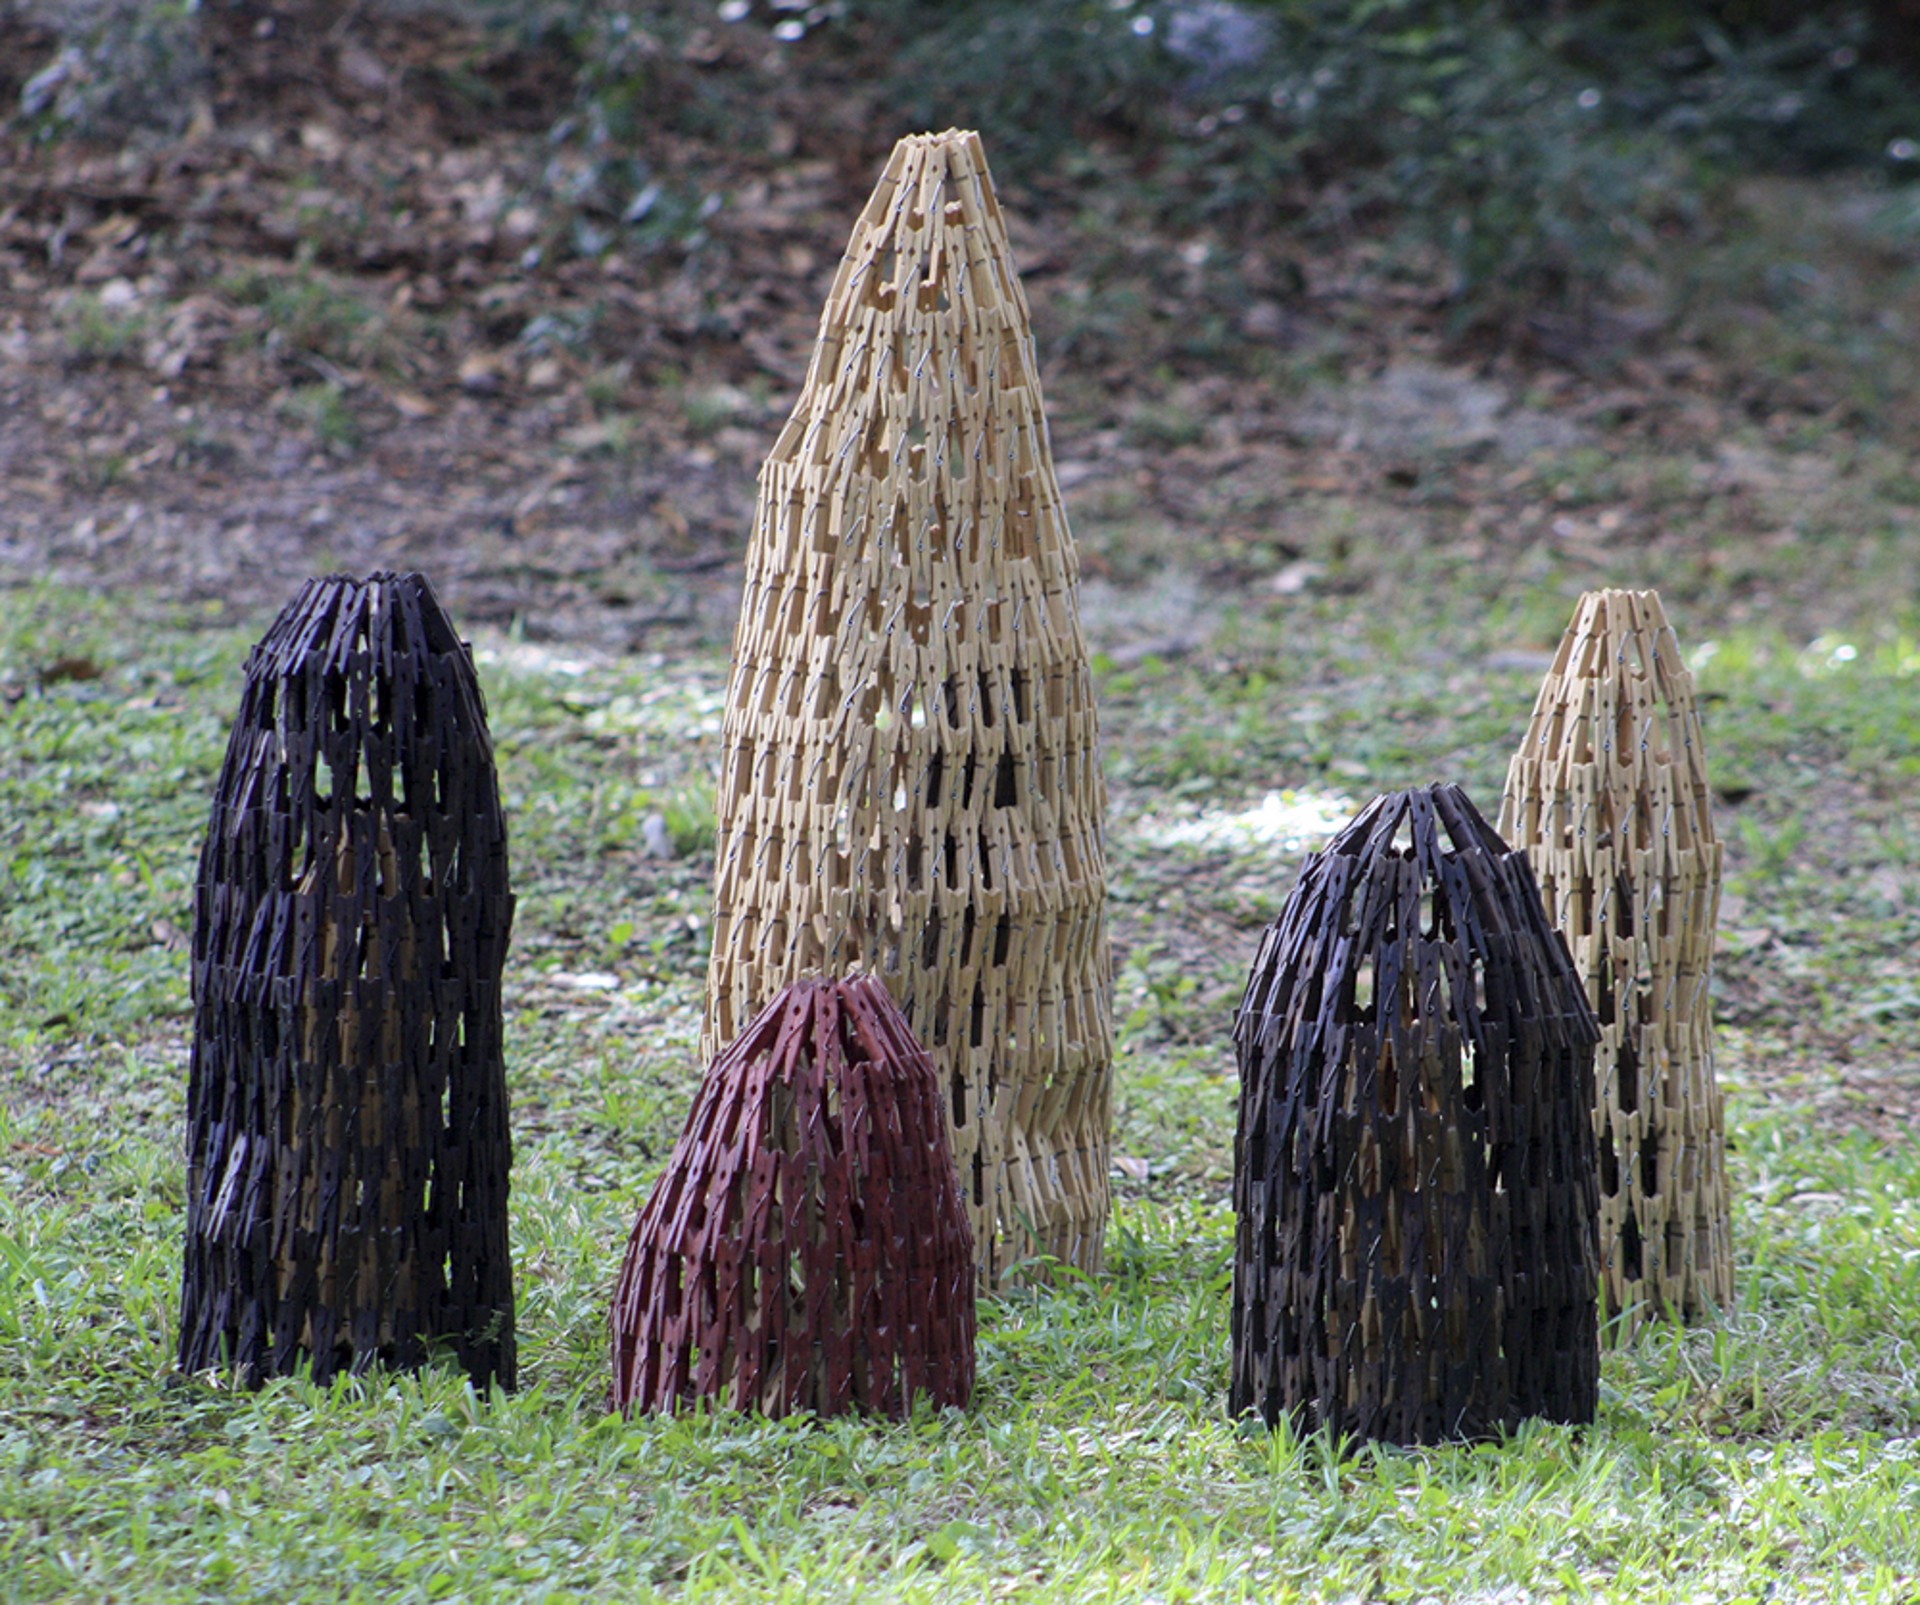 Cypress Knees (5 pieces) by Gerry Stecca